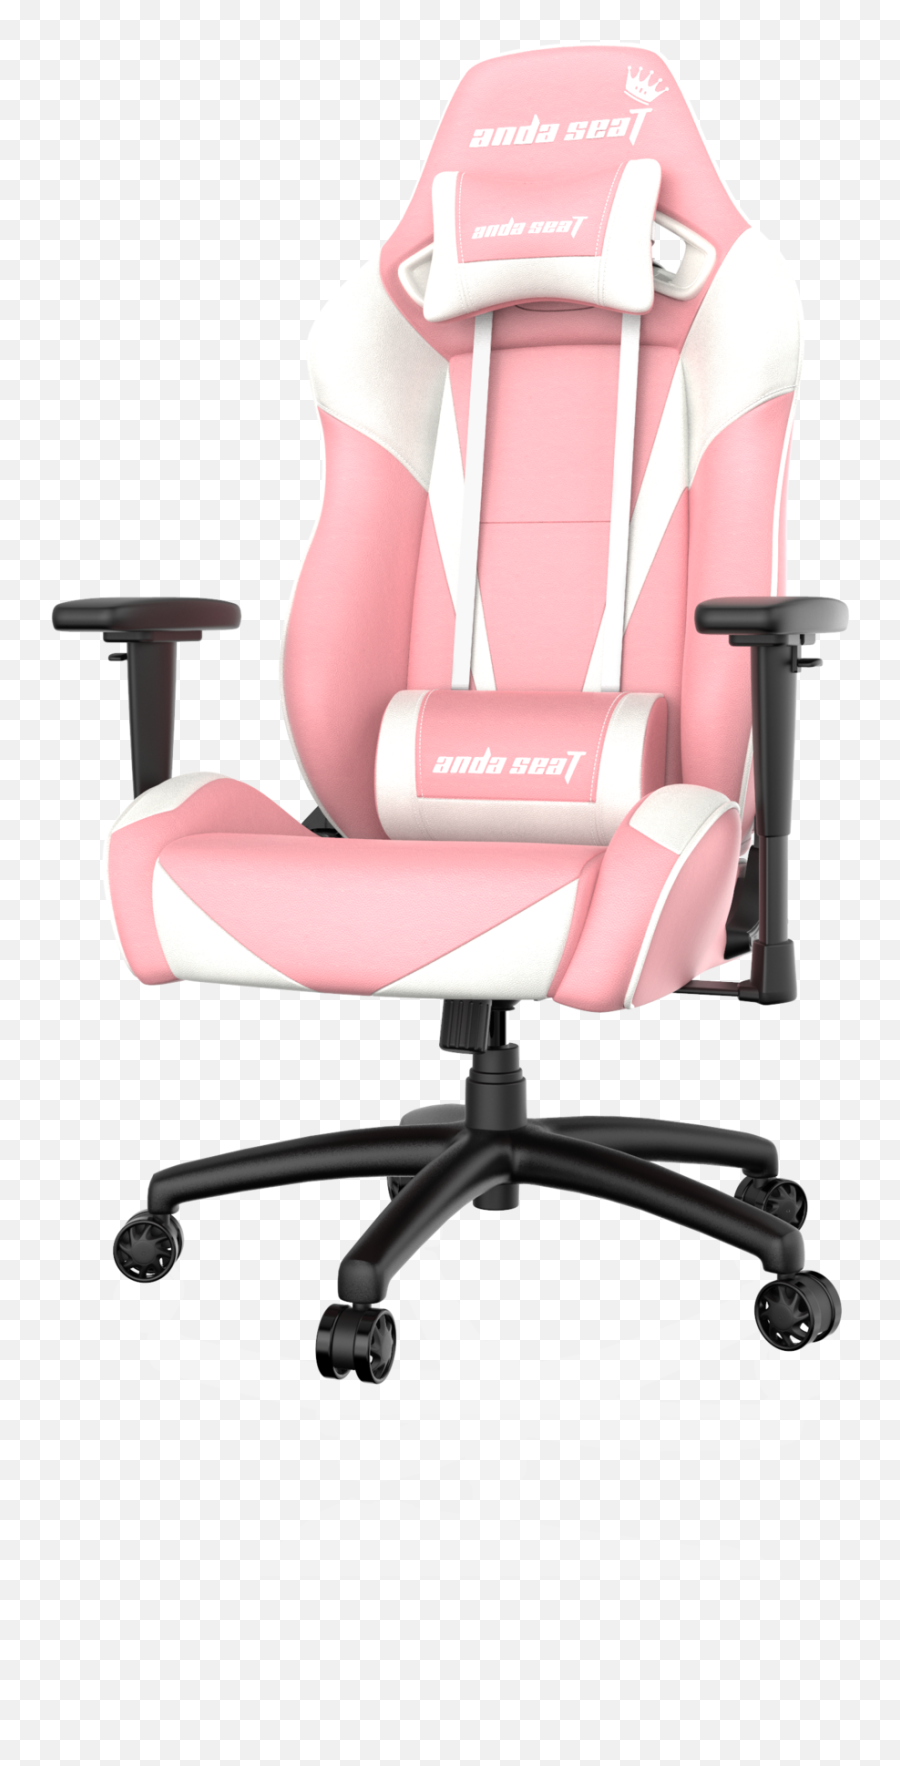 Anda Seat Pretty In Pink Gaming Chair One Piece To Build - Anda Seat Pink Gaming Chair Emoji,Chair Transparent